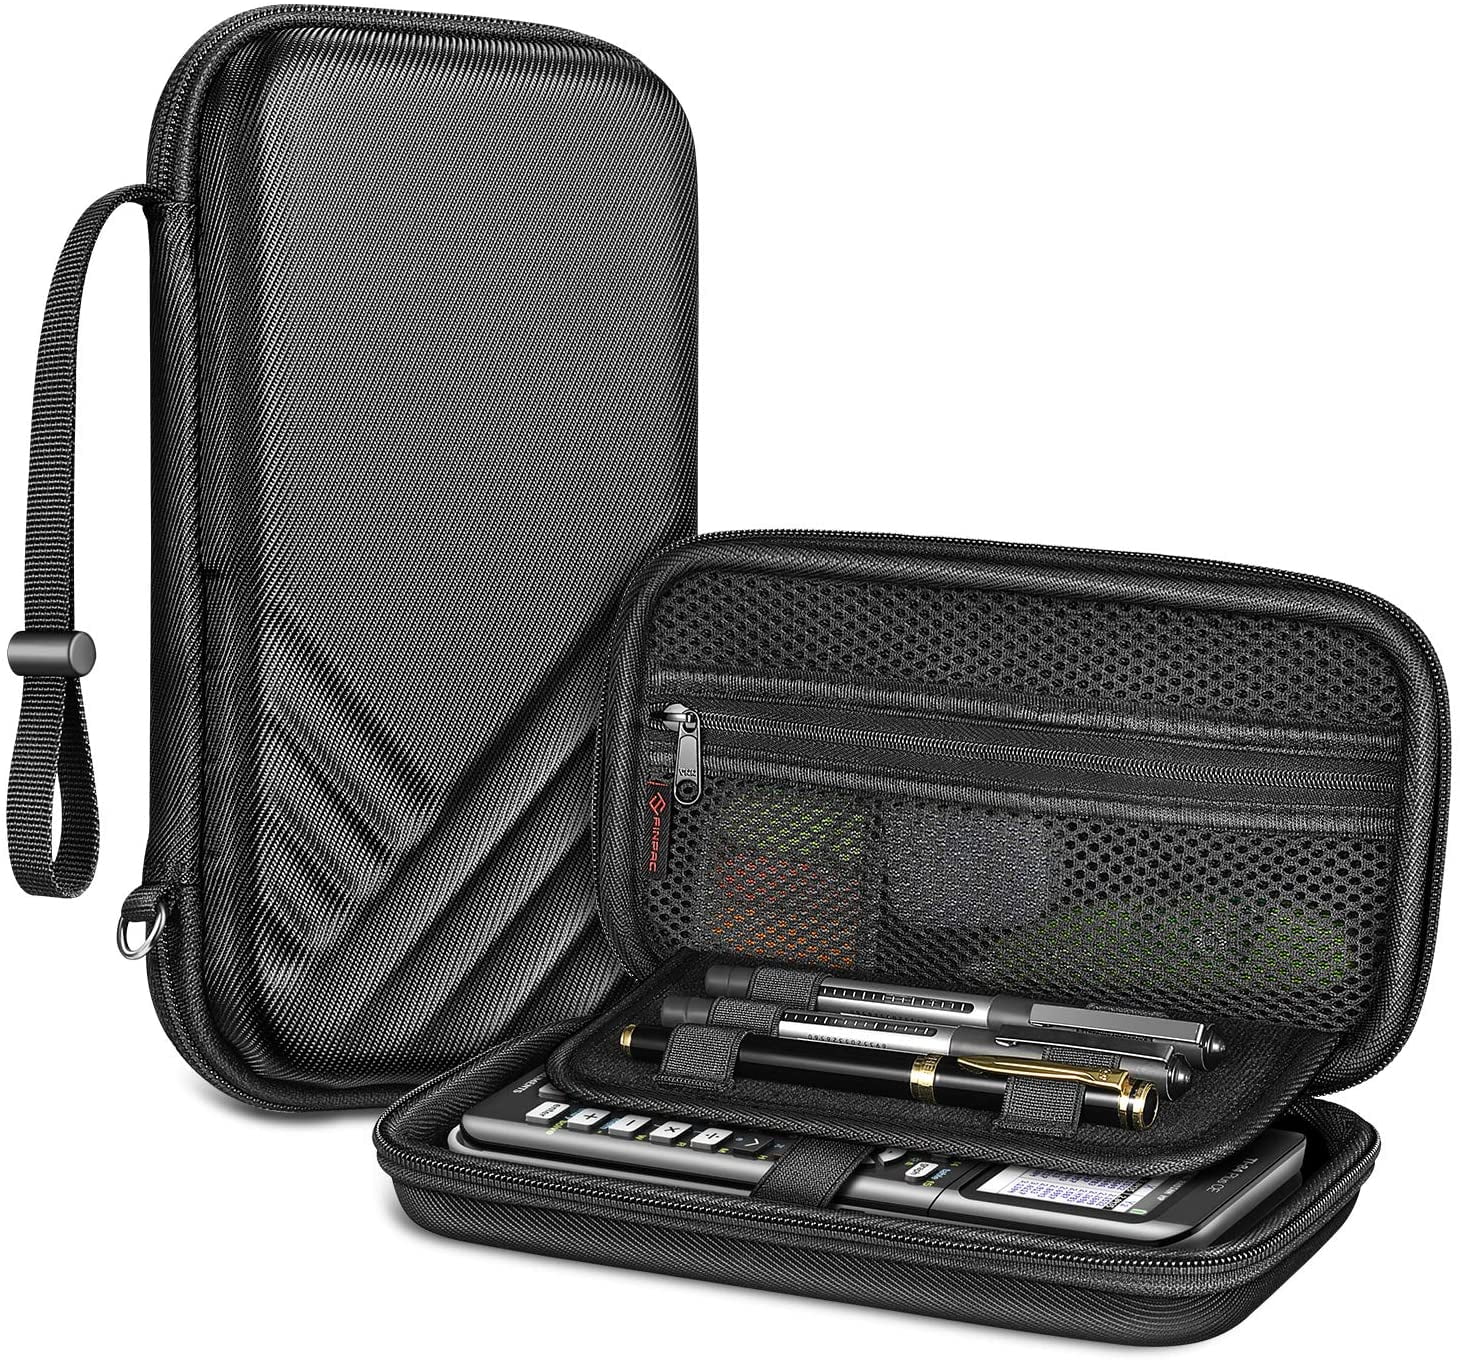 Travel Case for Texas Instruments Ti-84 plus/TI-83 Plus/HP Prime Graphing Calculator Large Capacity for Pens,Cables and Other Accessories